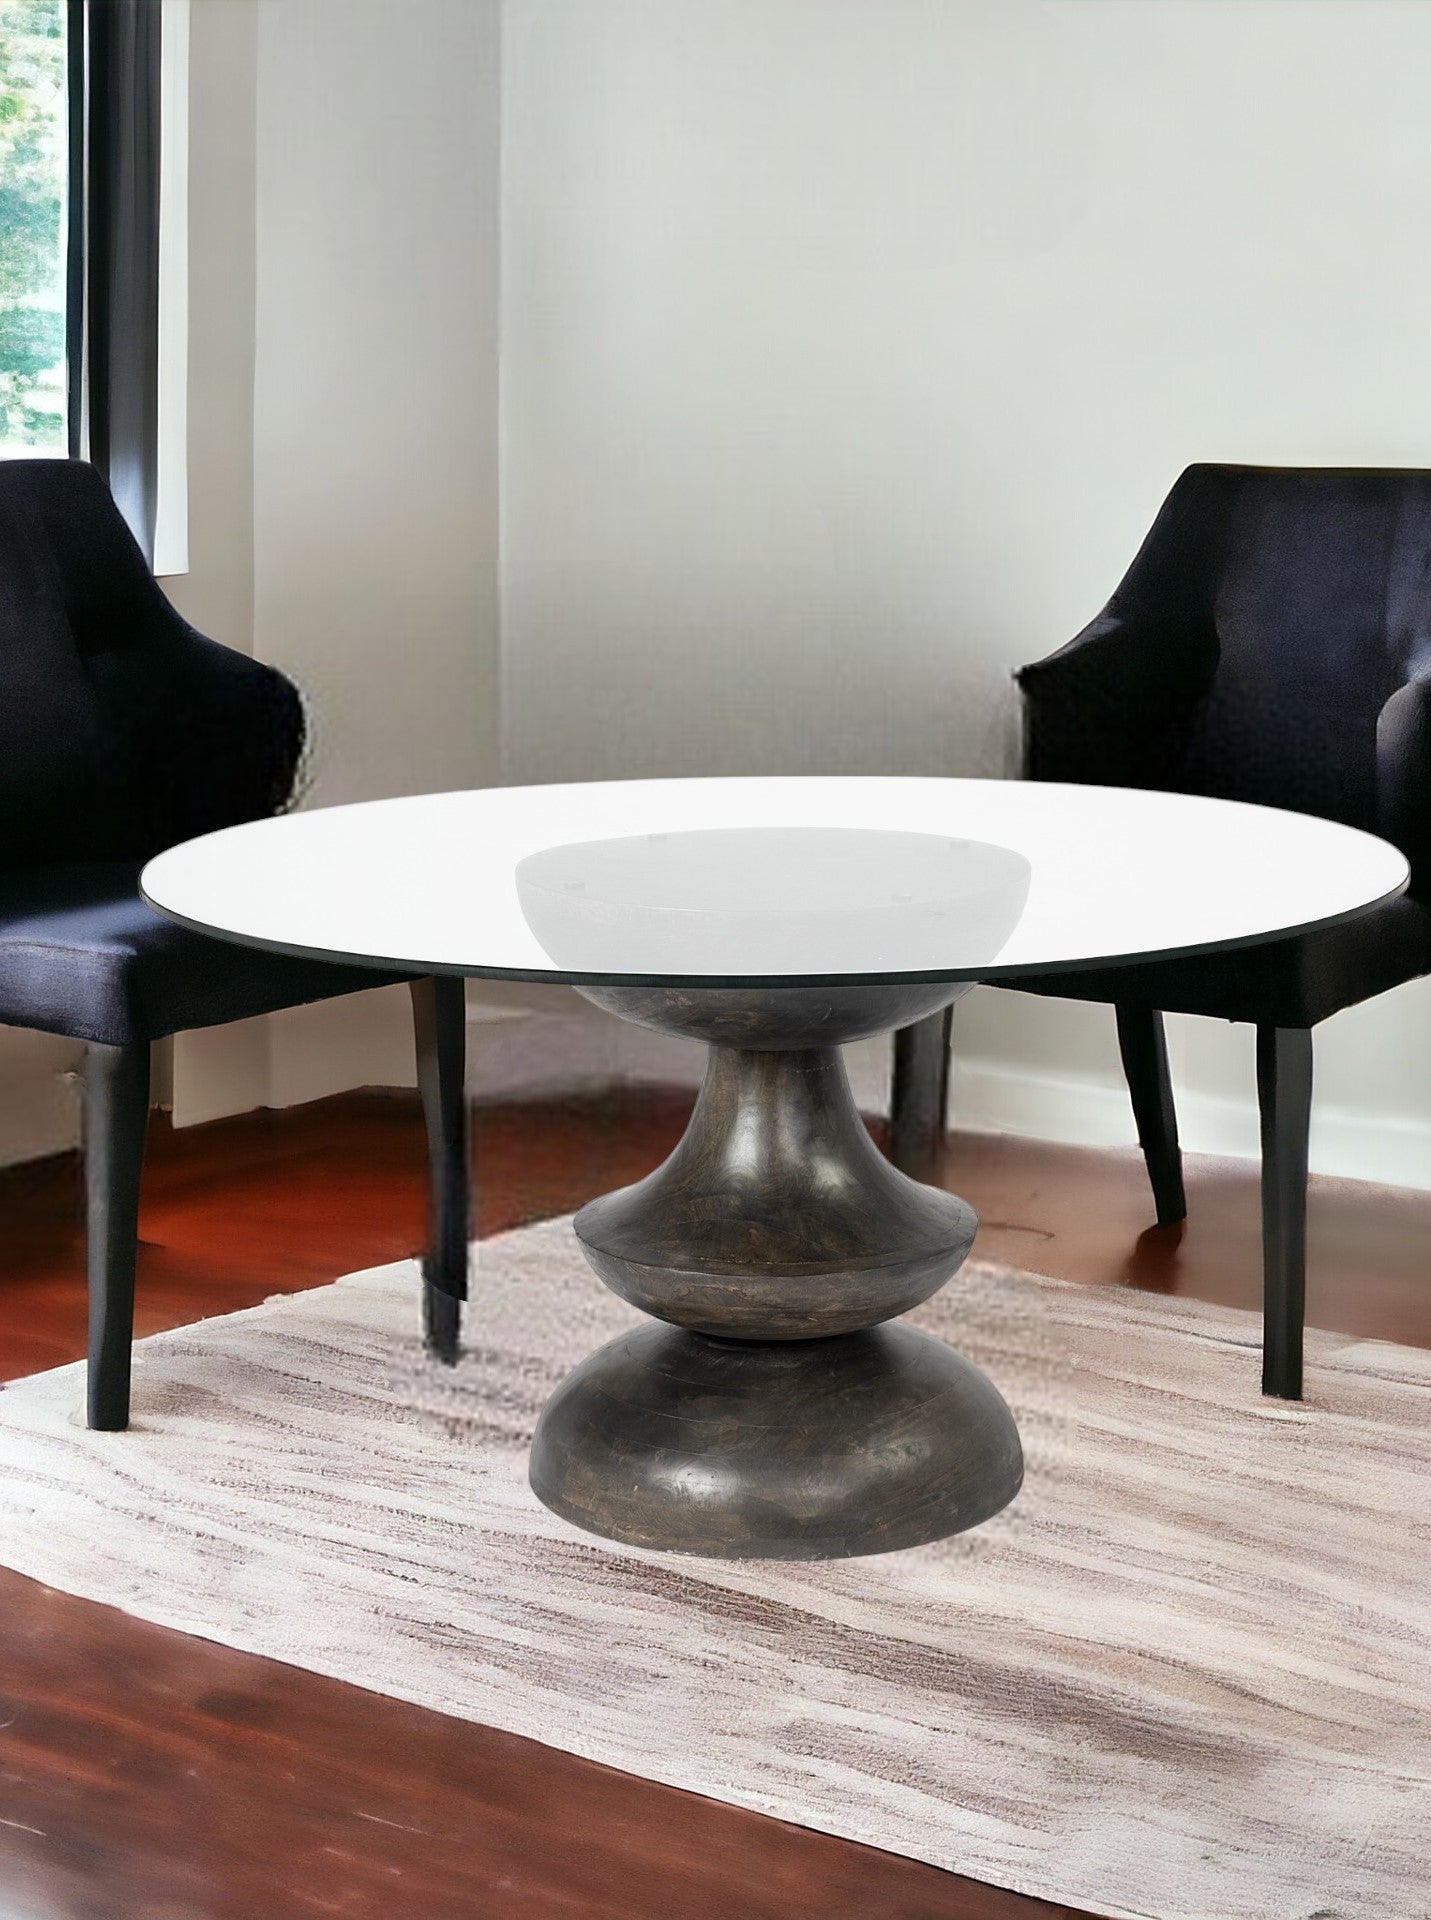 60" Round Glass Top Brown Wood With Pedestal Base Dining Table